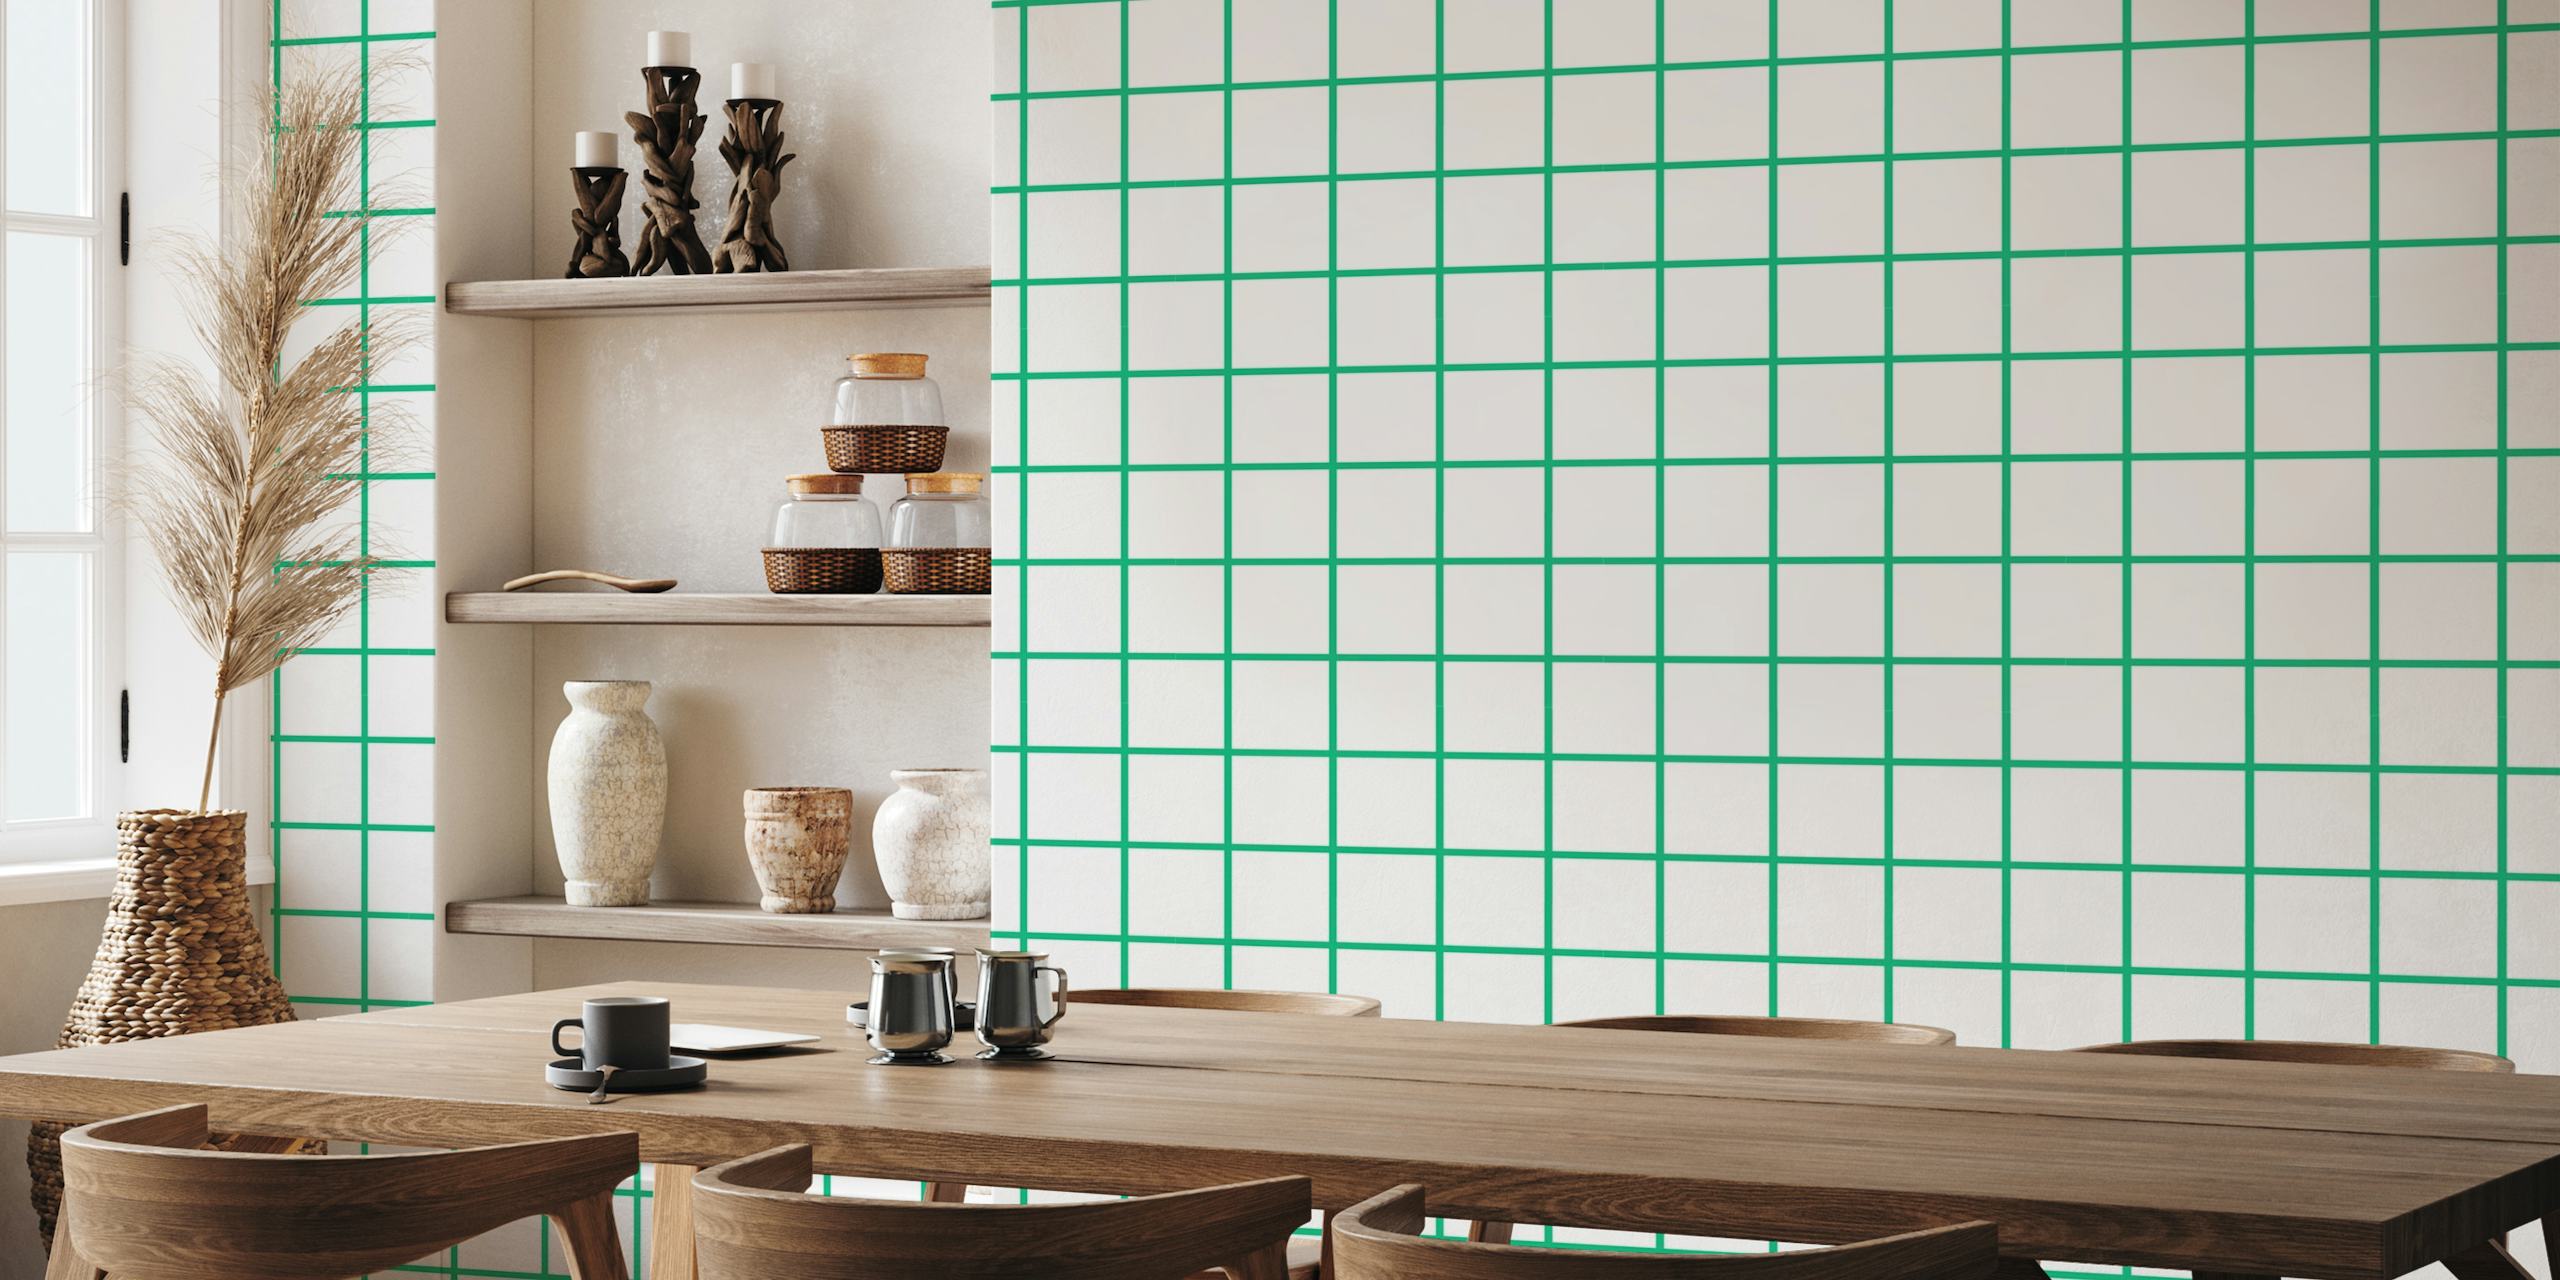 A grid pattern wall mural with green lines on a white background, giving a modern and clean look.